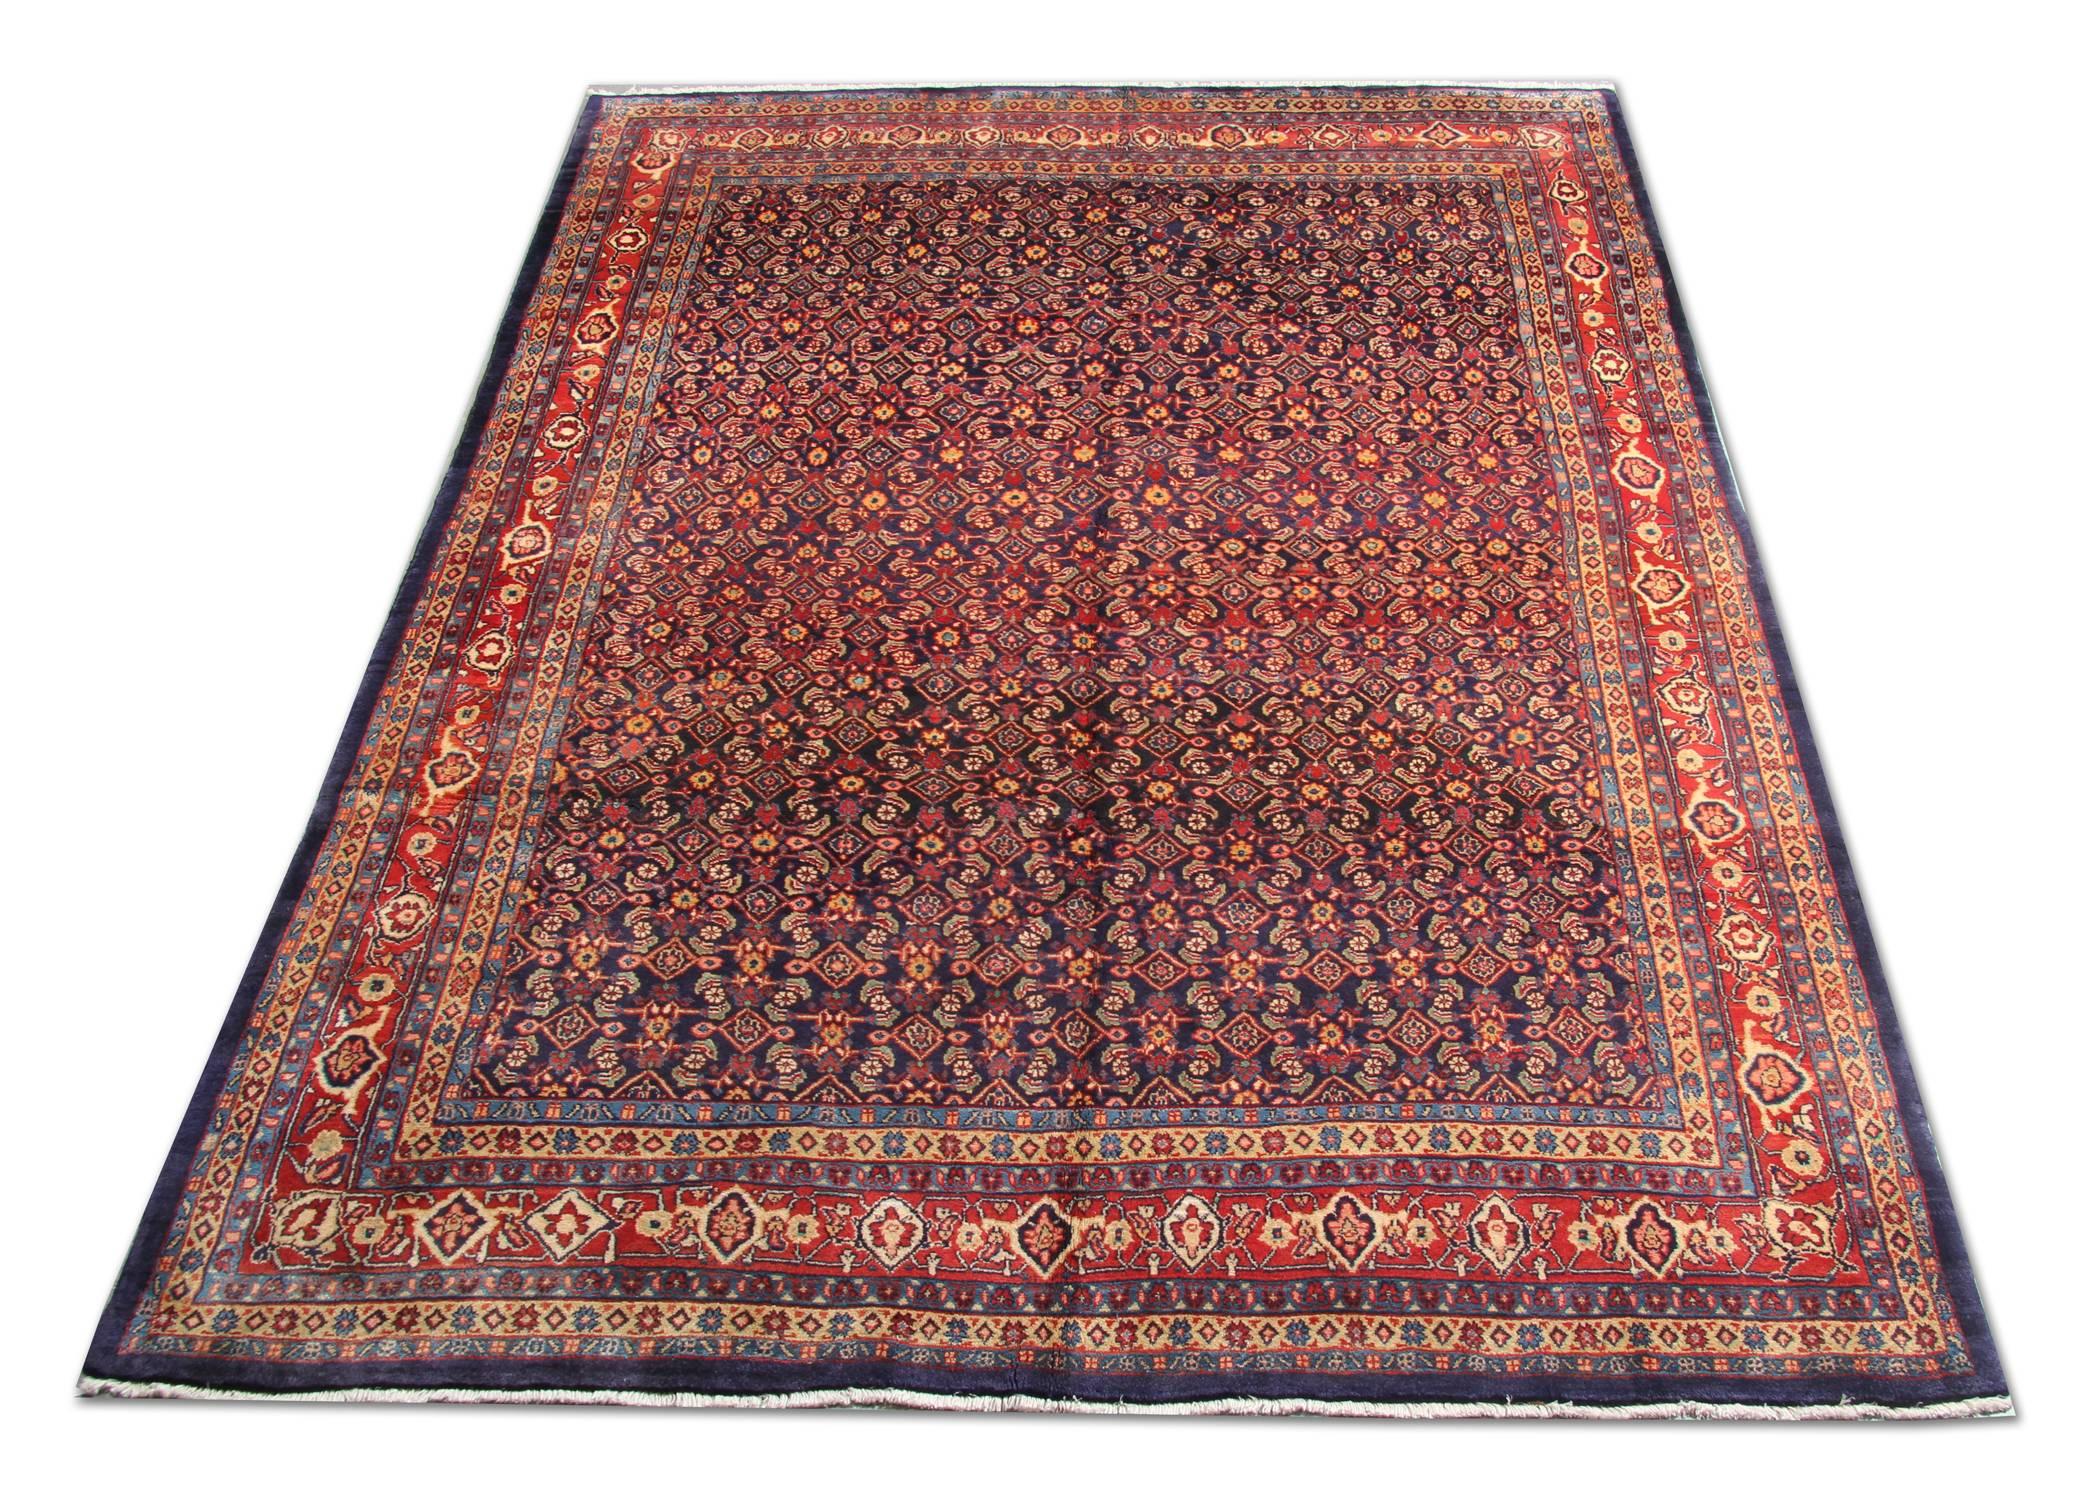 This wool rug was woven by hand with the finest organic wool in the 1990s. The central design features an intricate all-over design with a deep blue background decorated with red, yellow, green and cream accents that make up the decorative pattern.